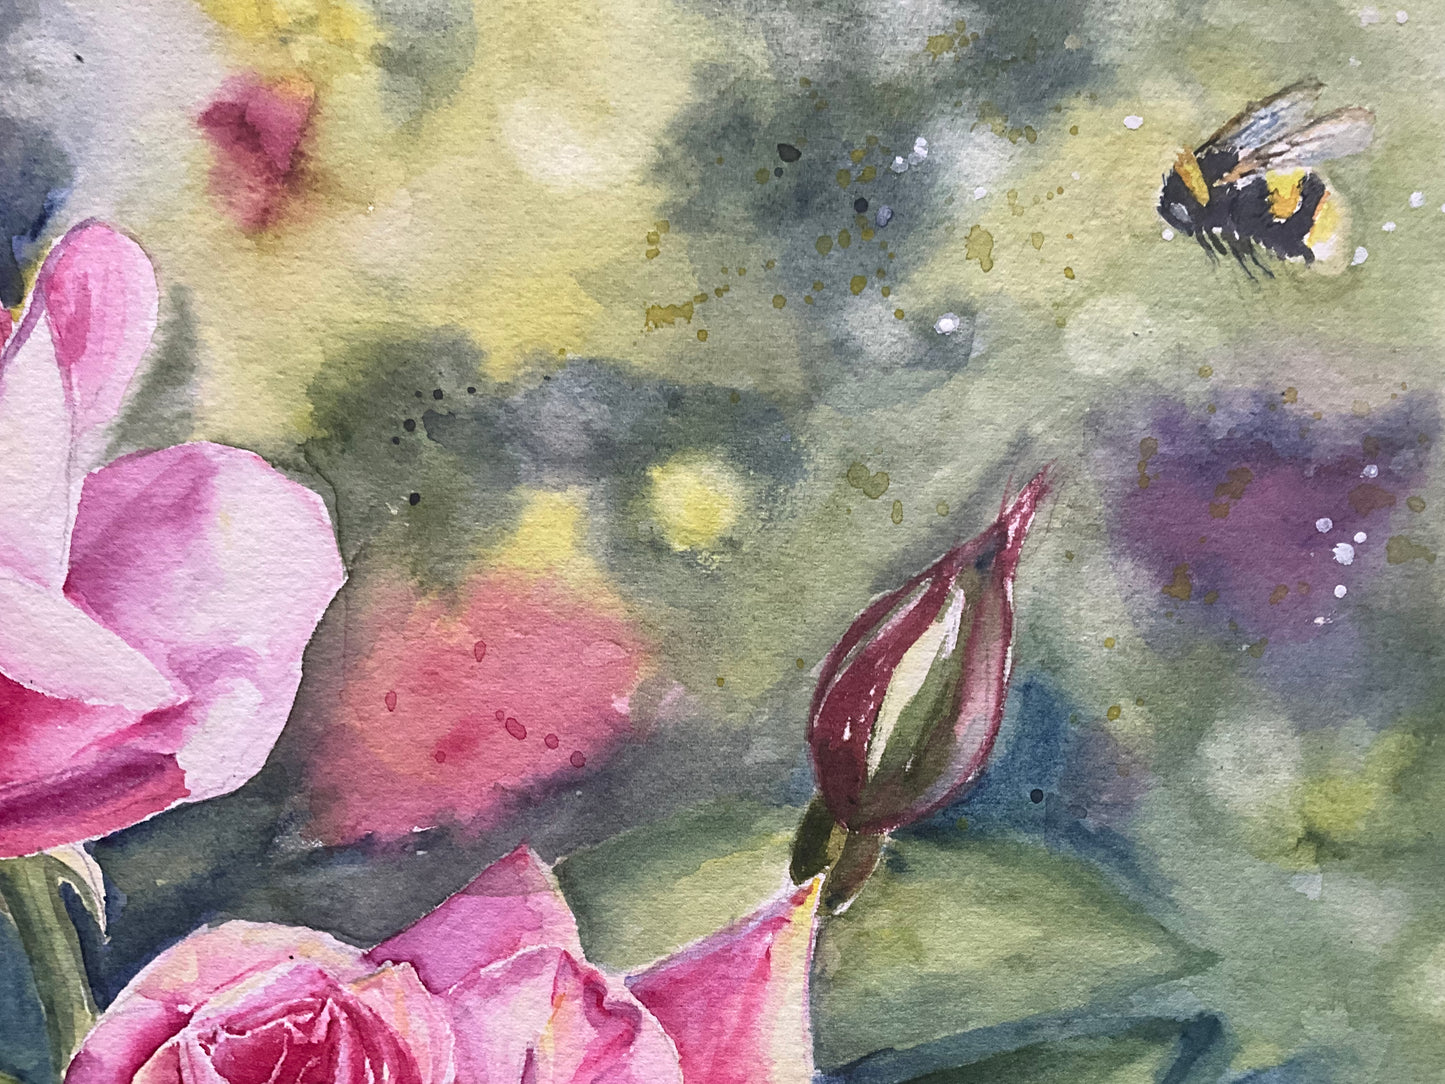 ROSES- A FOREVER DELIGHT - Original watercolour painting